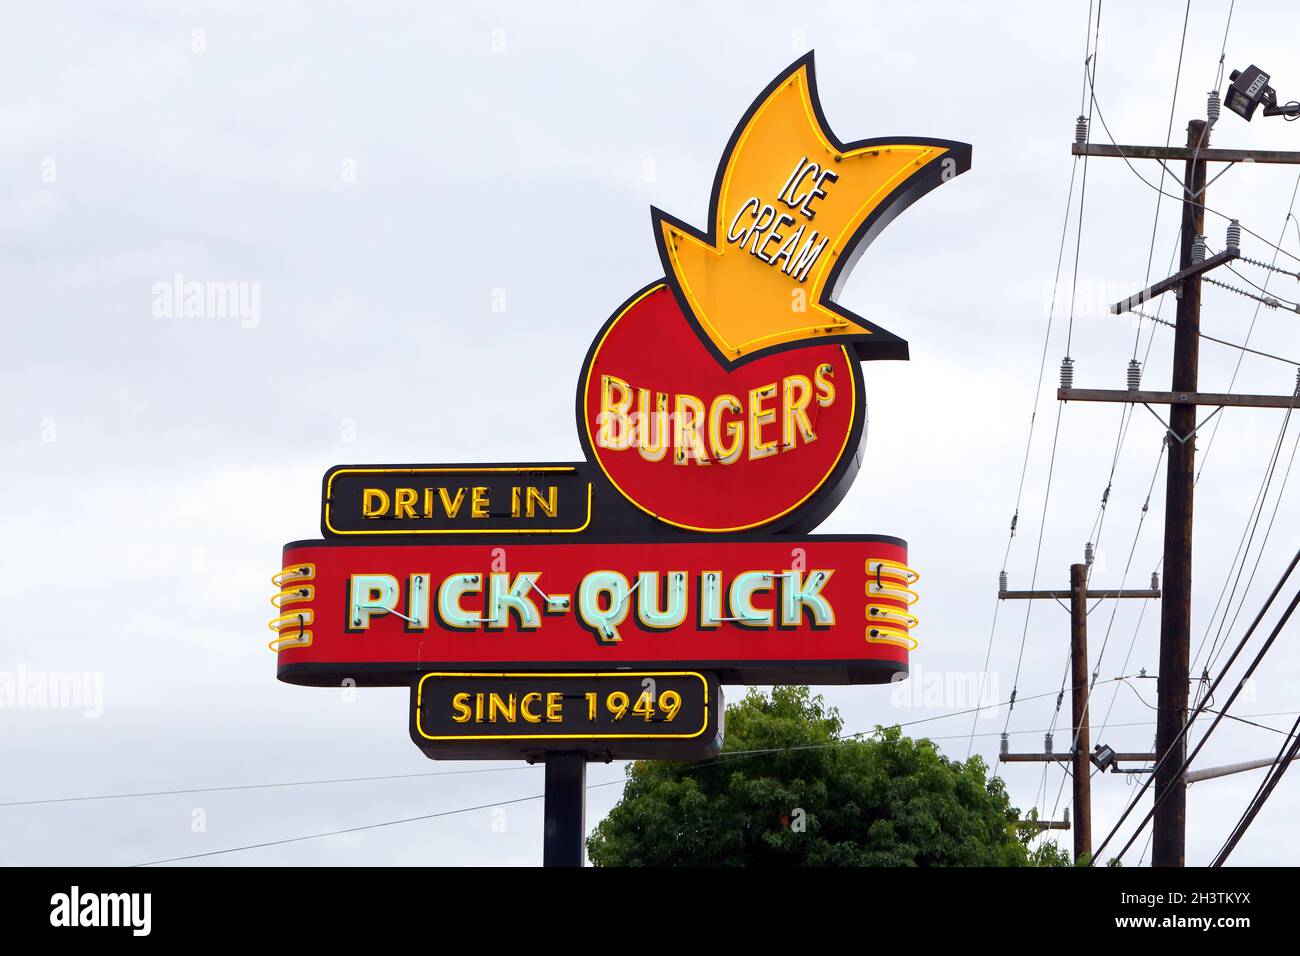 PICK-QUICK Drive In, 2990 4th Ave S, Seattle, Washington. neon sign marquee of a hamburger restaurant in the SoDo neighborhood. Stock Photo